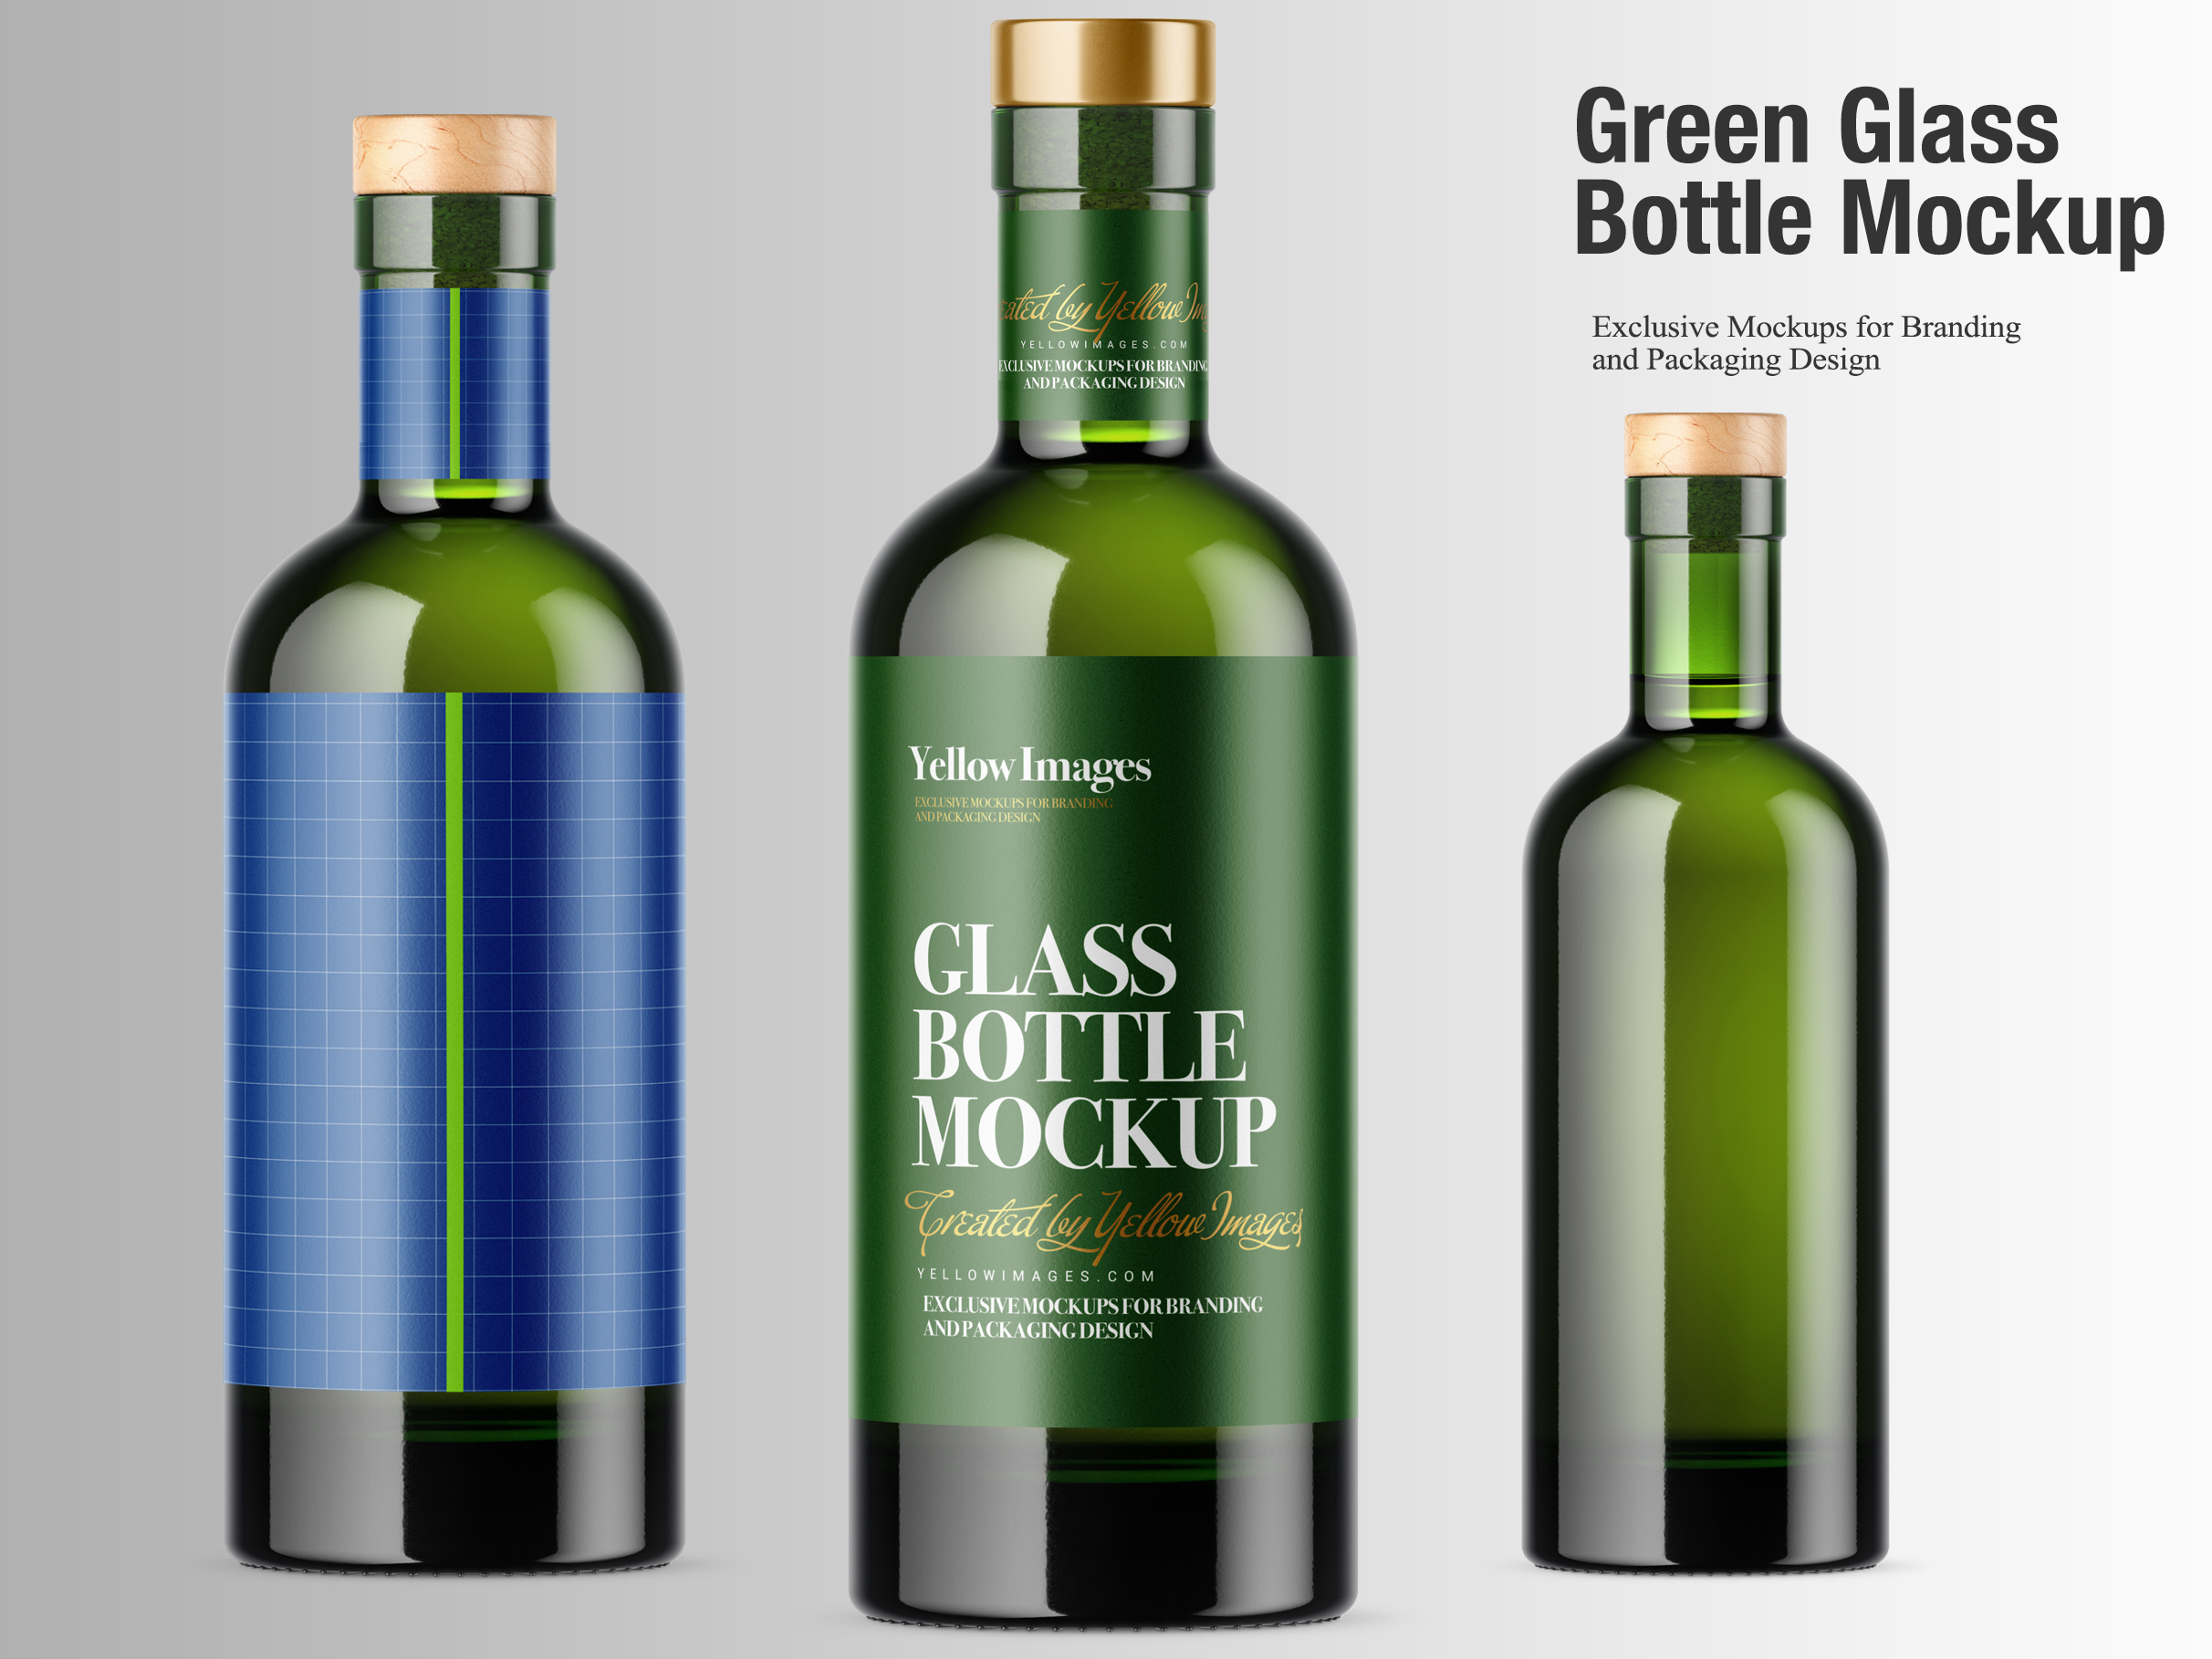 Medical Alcohol Bottle Mockup Download Free And Premium Quality Psd Mockup Templates